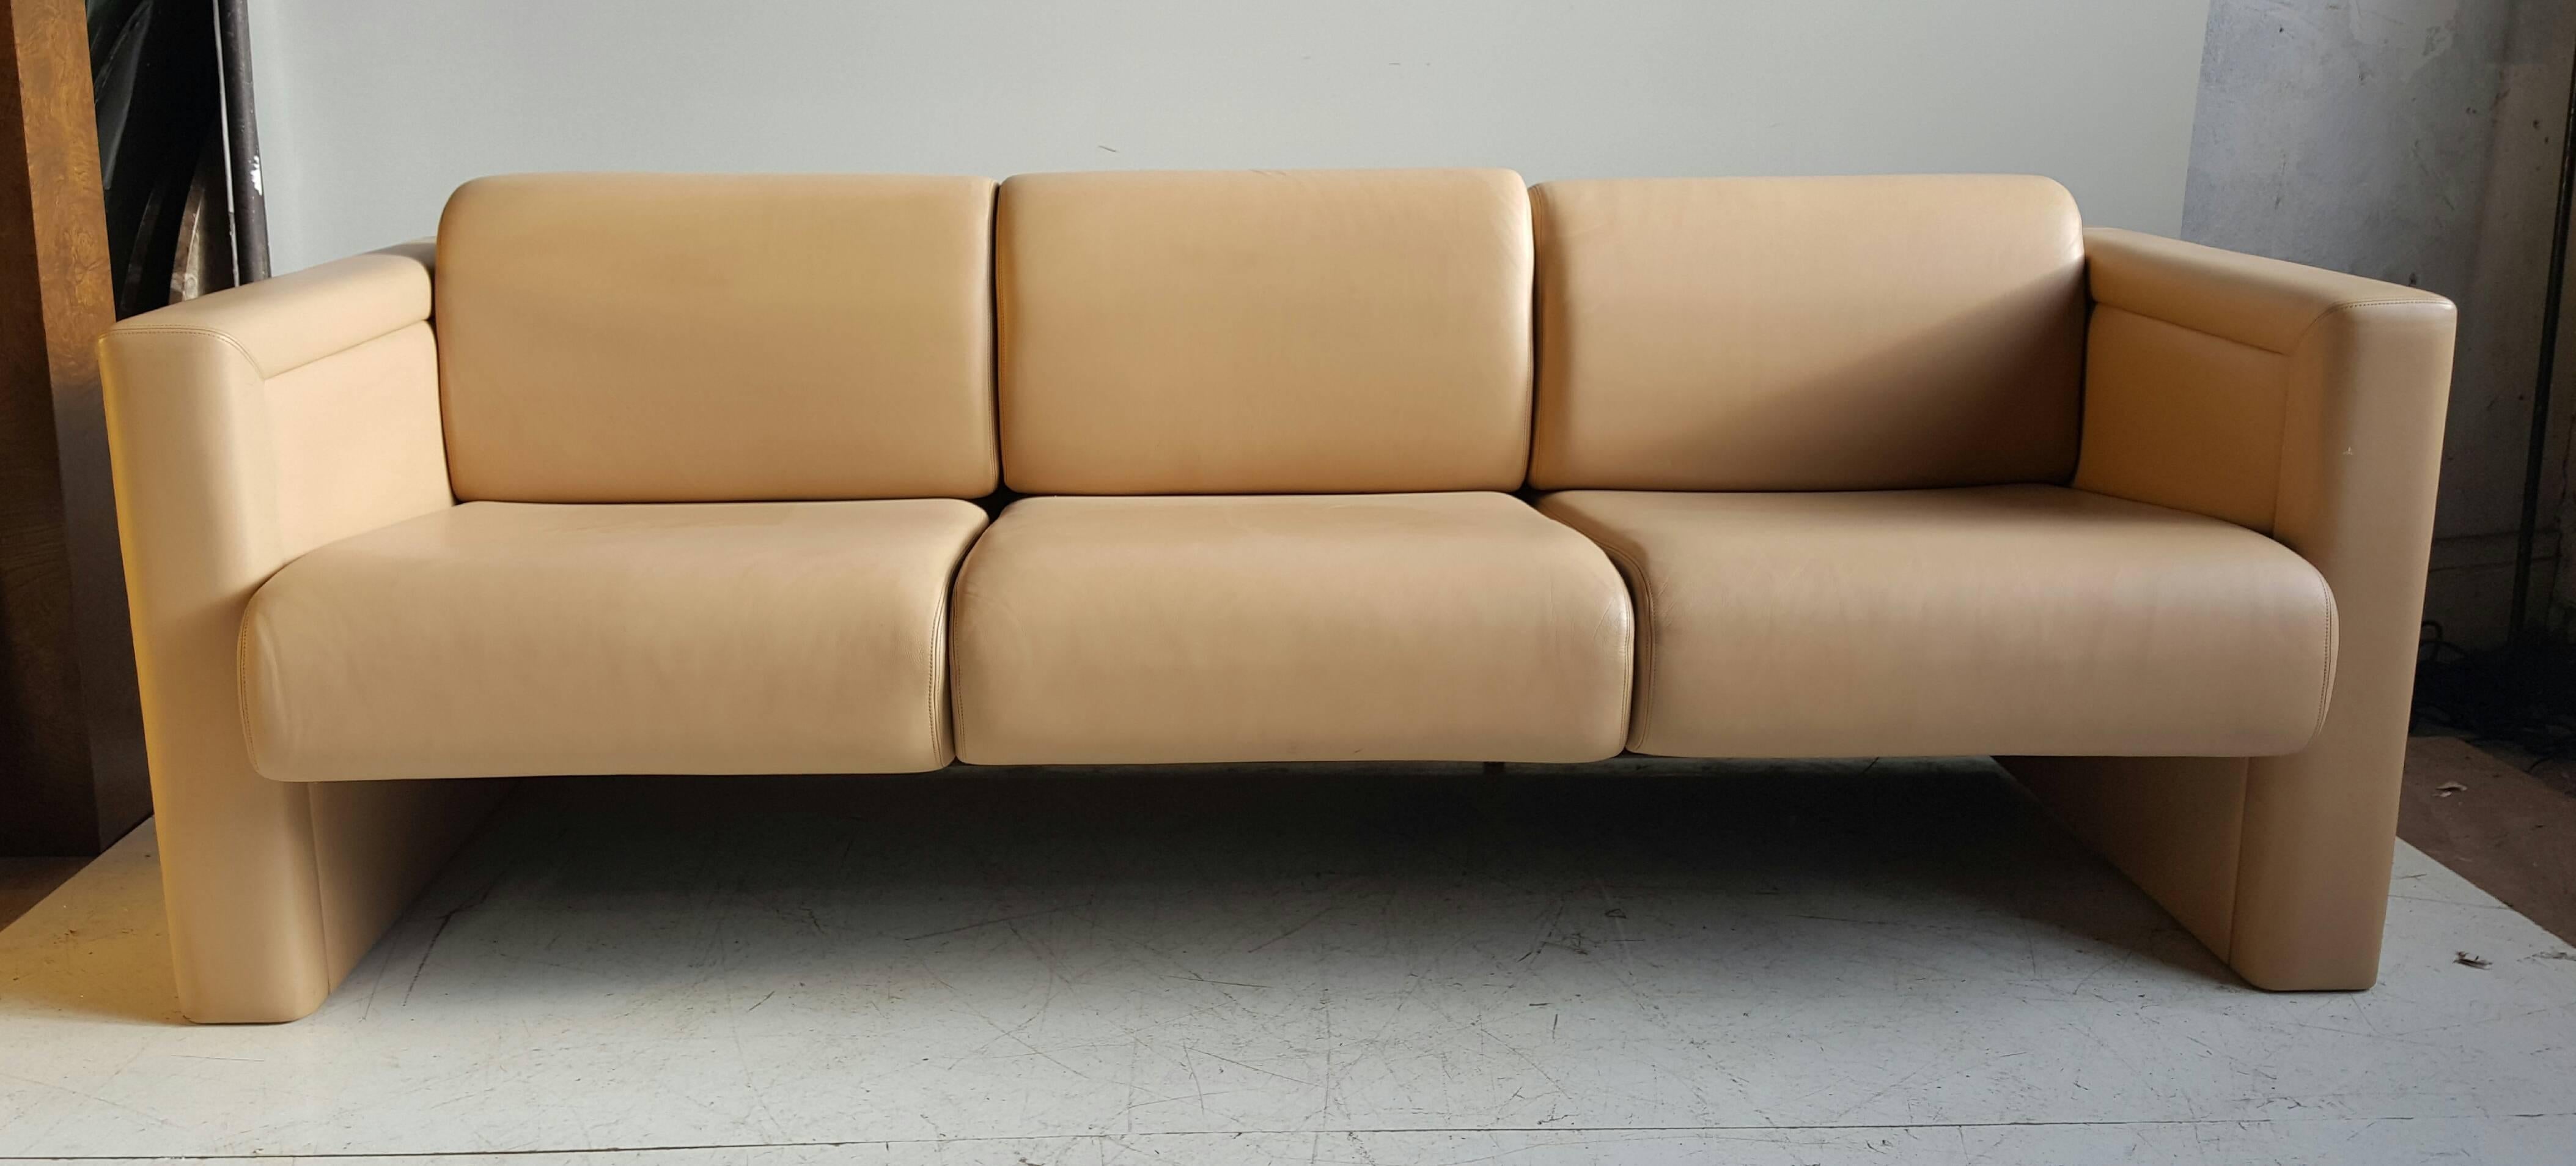 Modernist Italian leather sofa designed by Knoll. Amazing butterscotch spinneybeck leather.